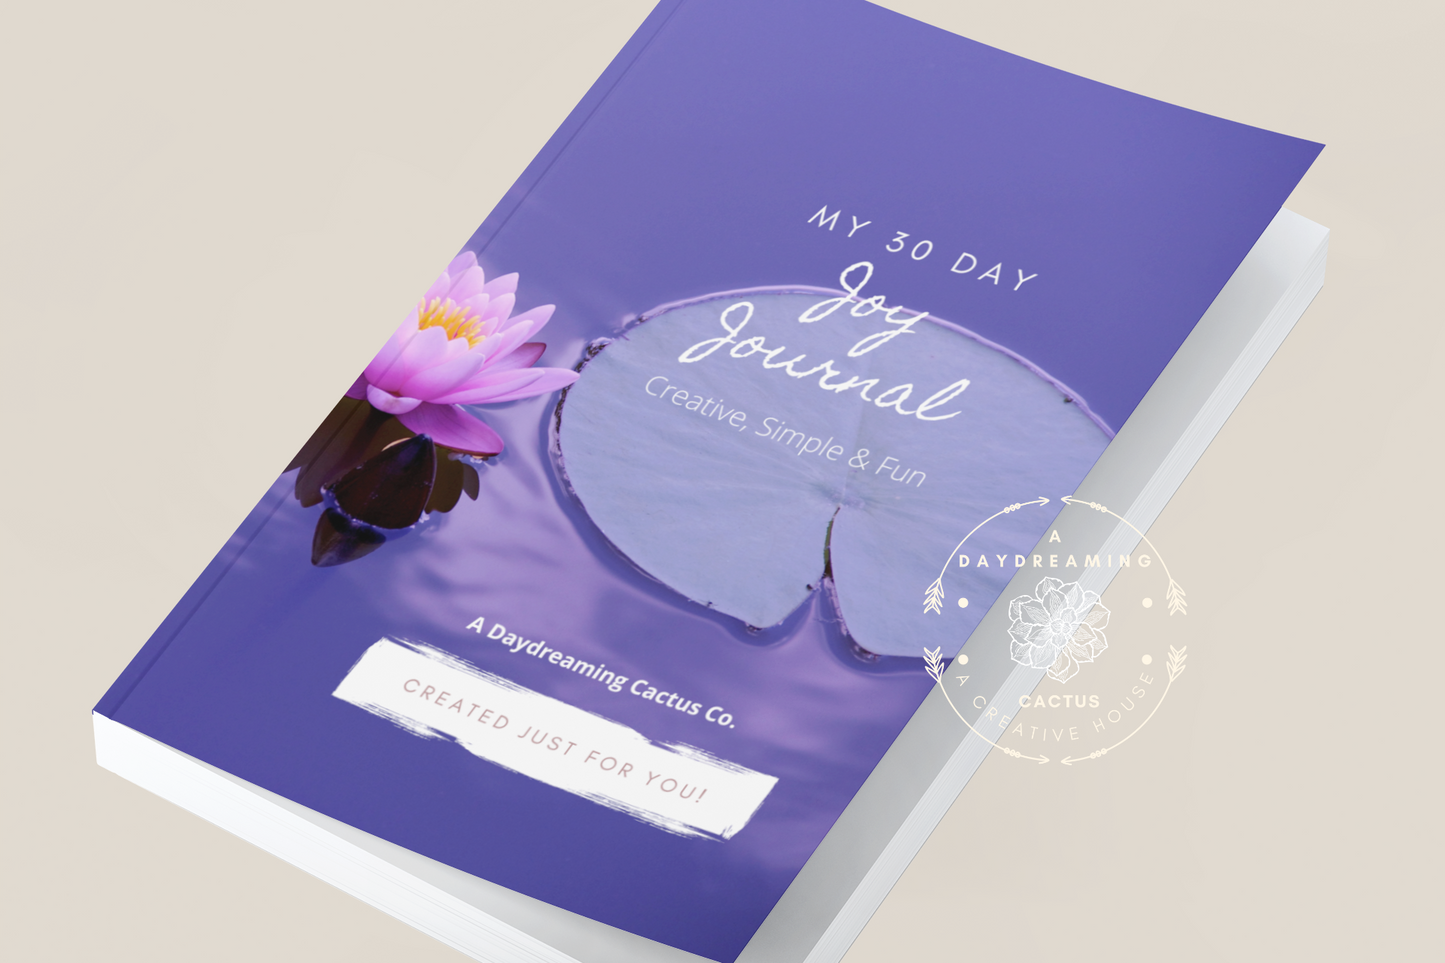 My 30 Day Joy Journal ~ 3 Different Covers offered (Lavender Fields, Daisies, Lily Pad)